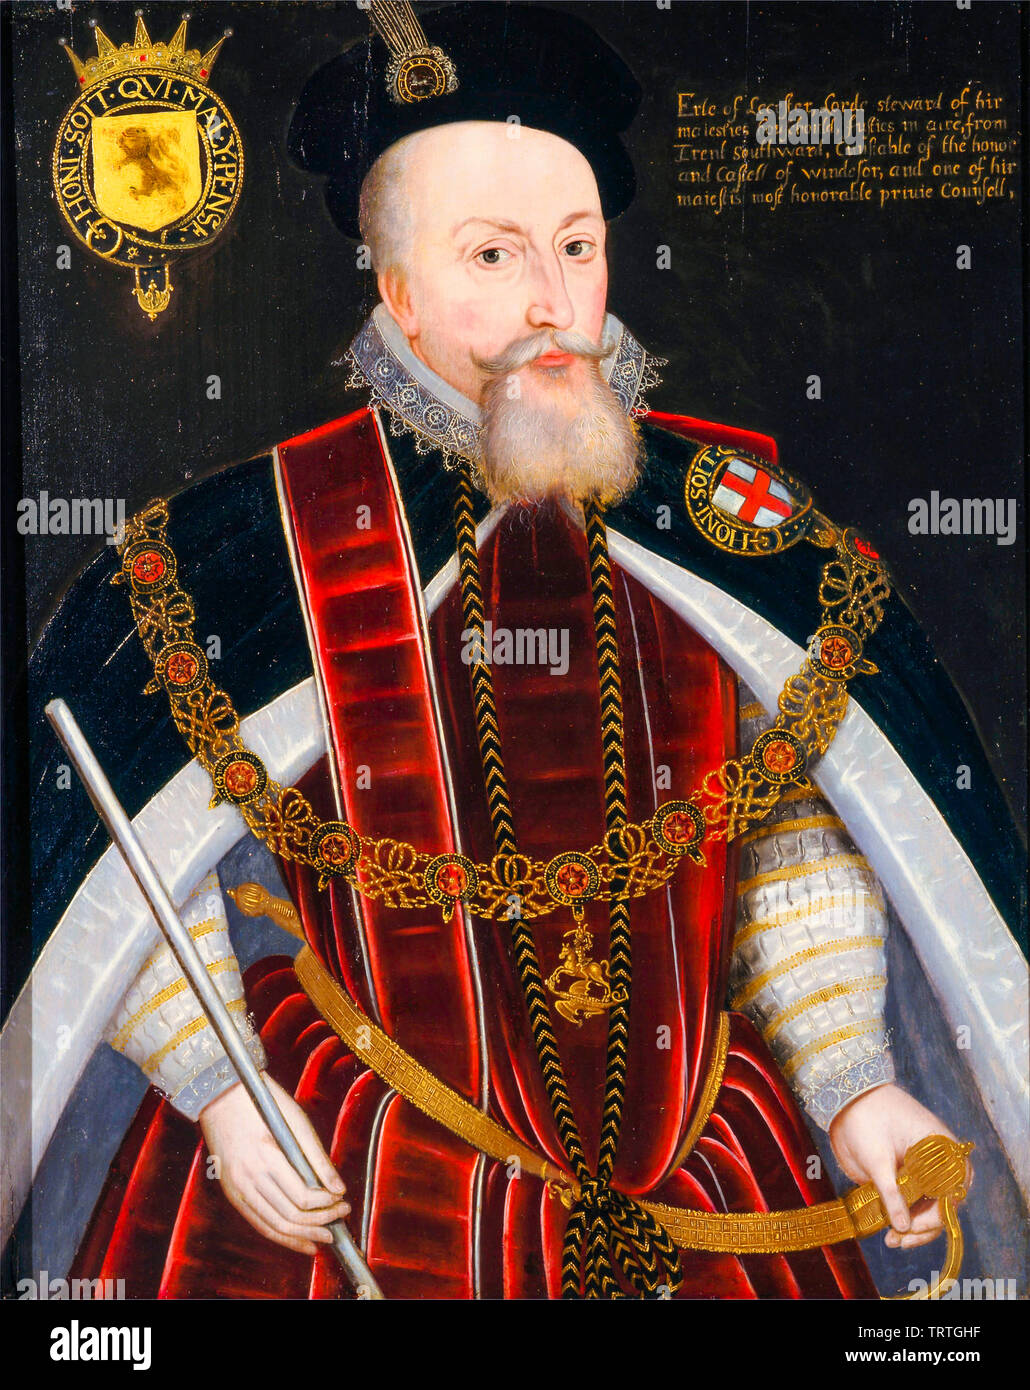 Robert Dudley, Earl of Leicester, 1532-1588, portrait painting, circa 1587 Stock Photo